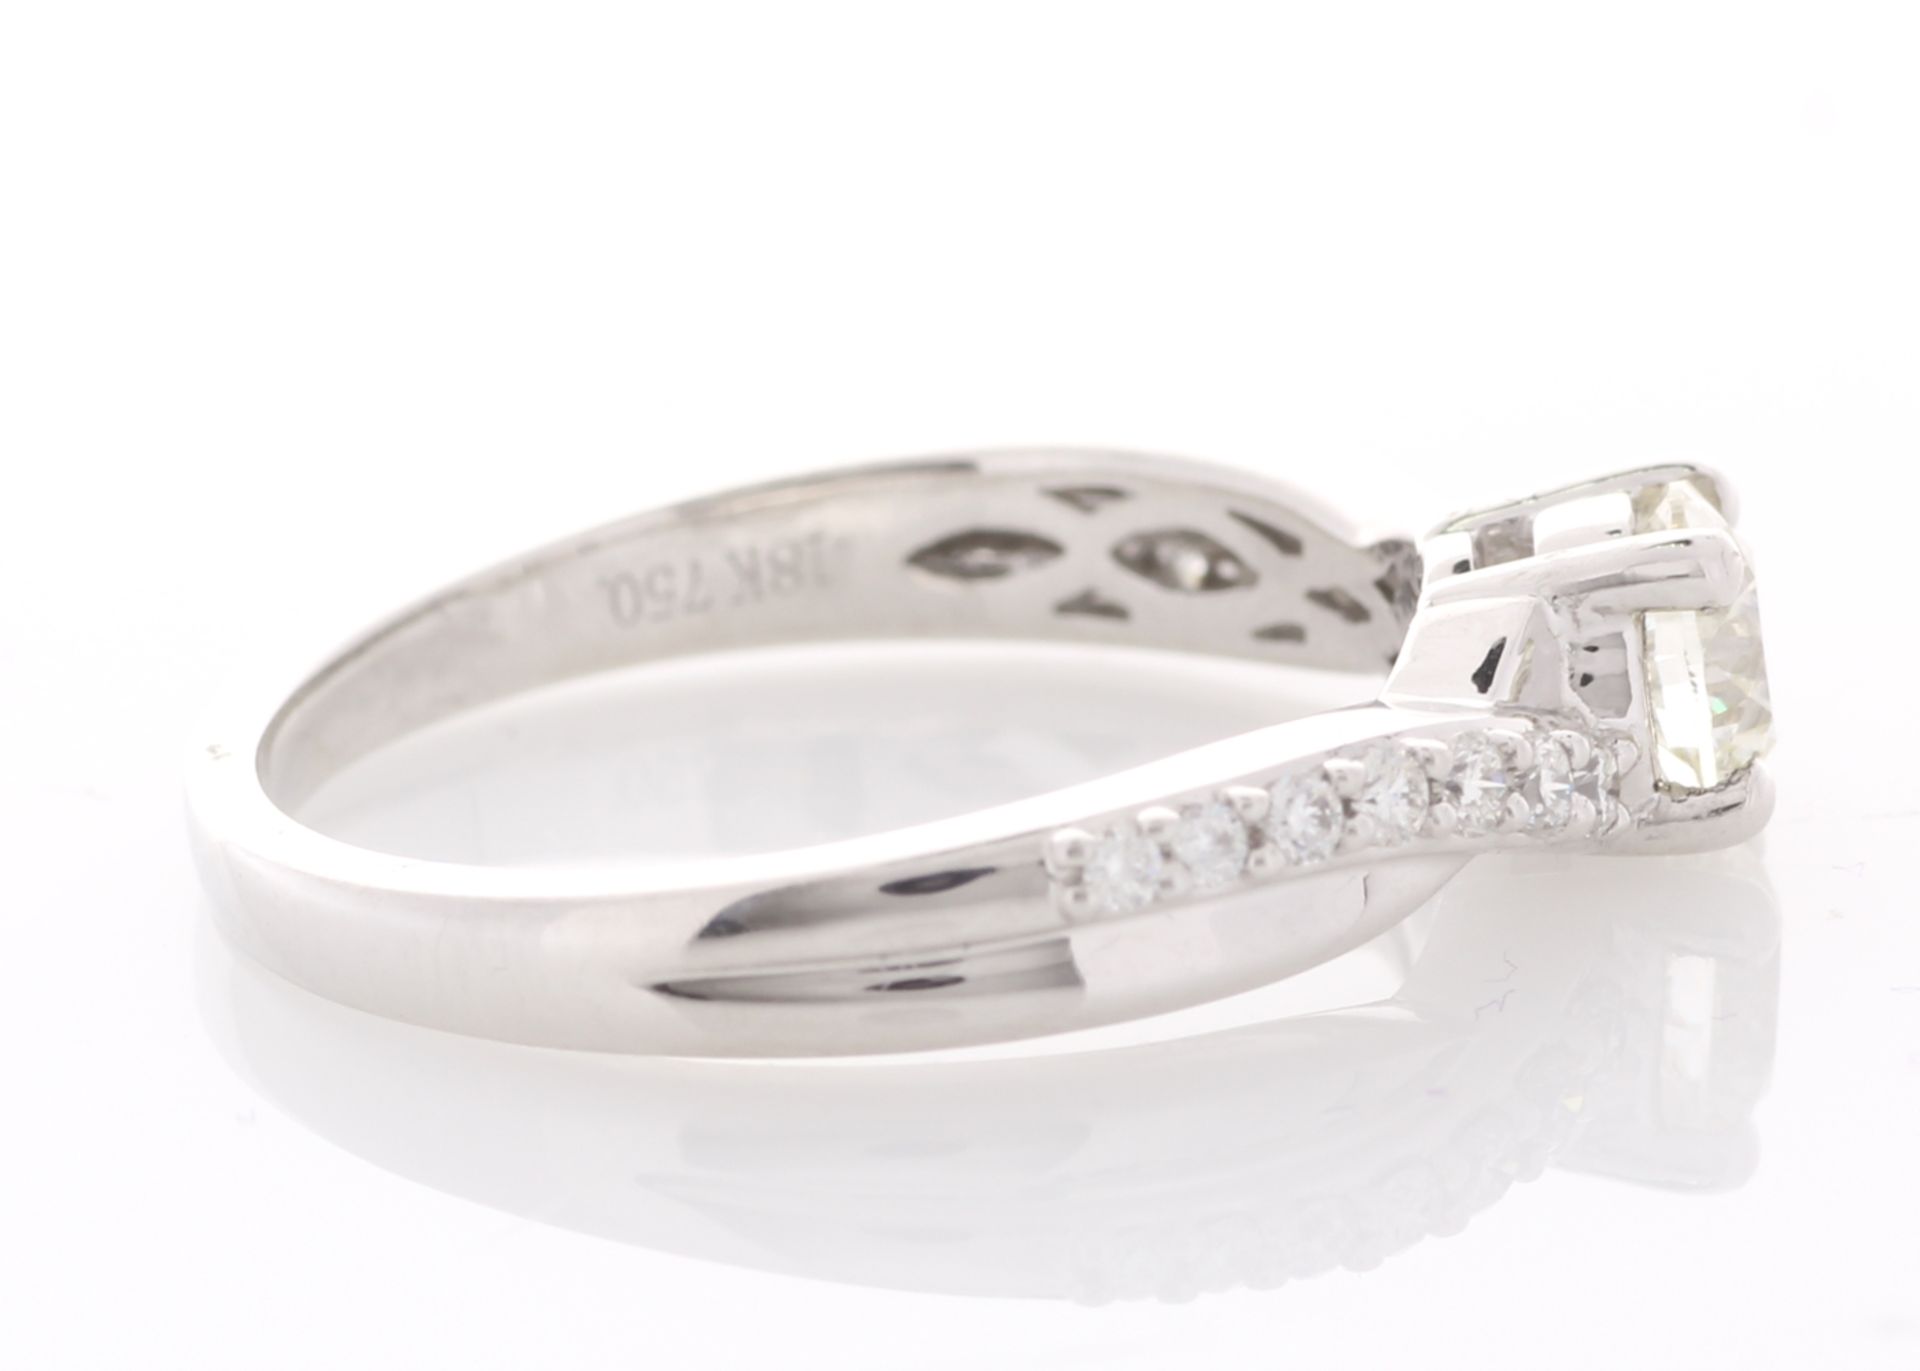 18ct White Gold Single Stone Fancy Claw Set Diamond Ring (0.52) 0.70 Carats - Valued by IDI £5,995. - Image 4 of 5